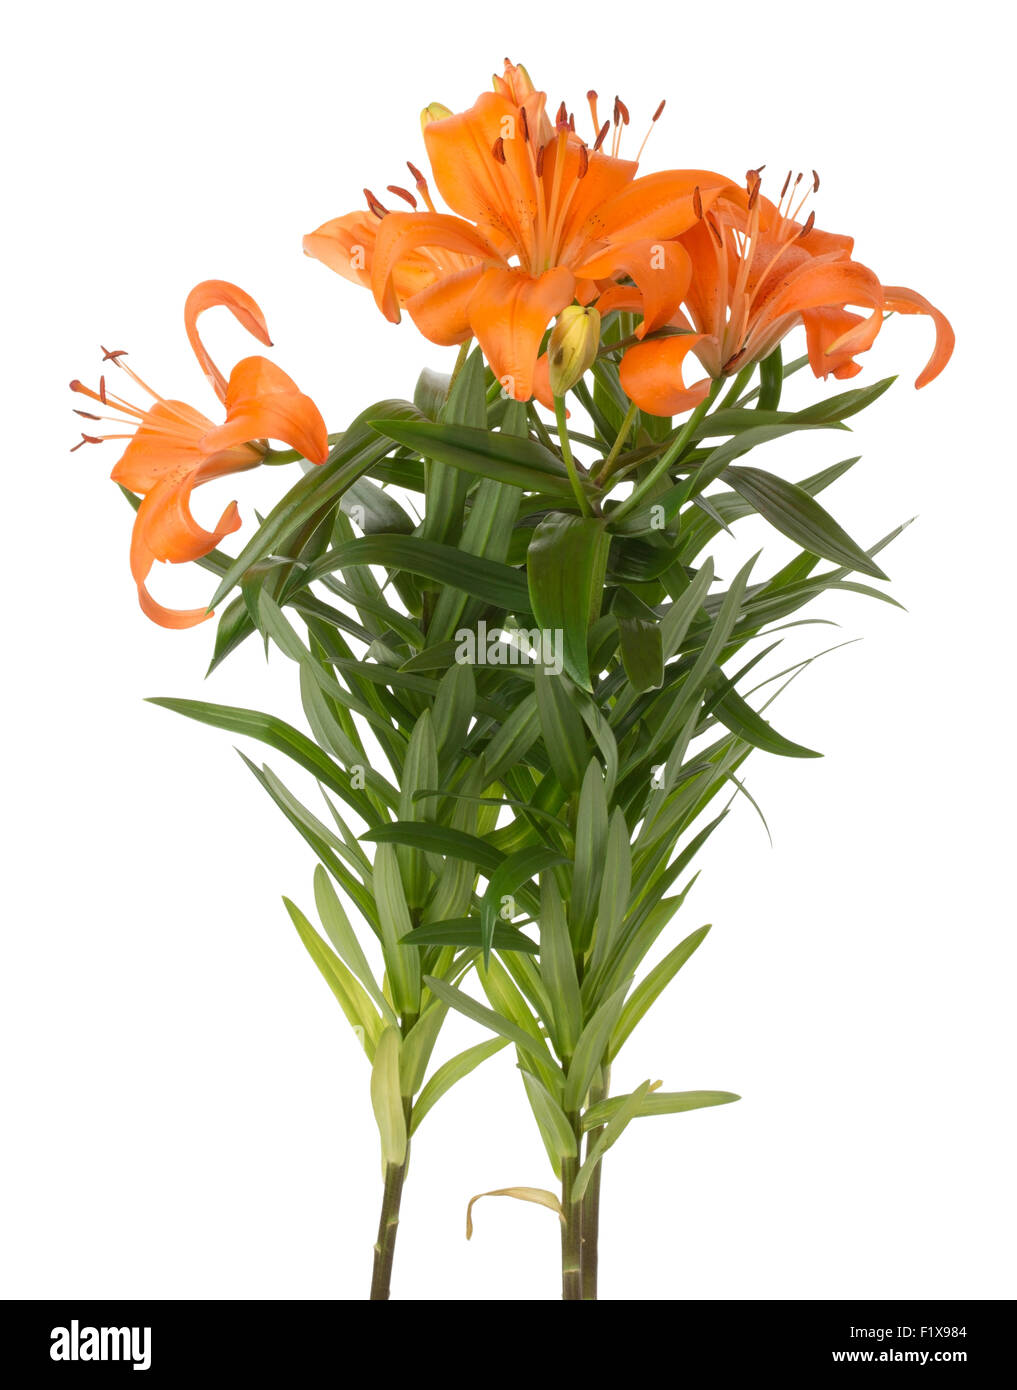 bouquet of lilies on a white background. Stock Photo